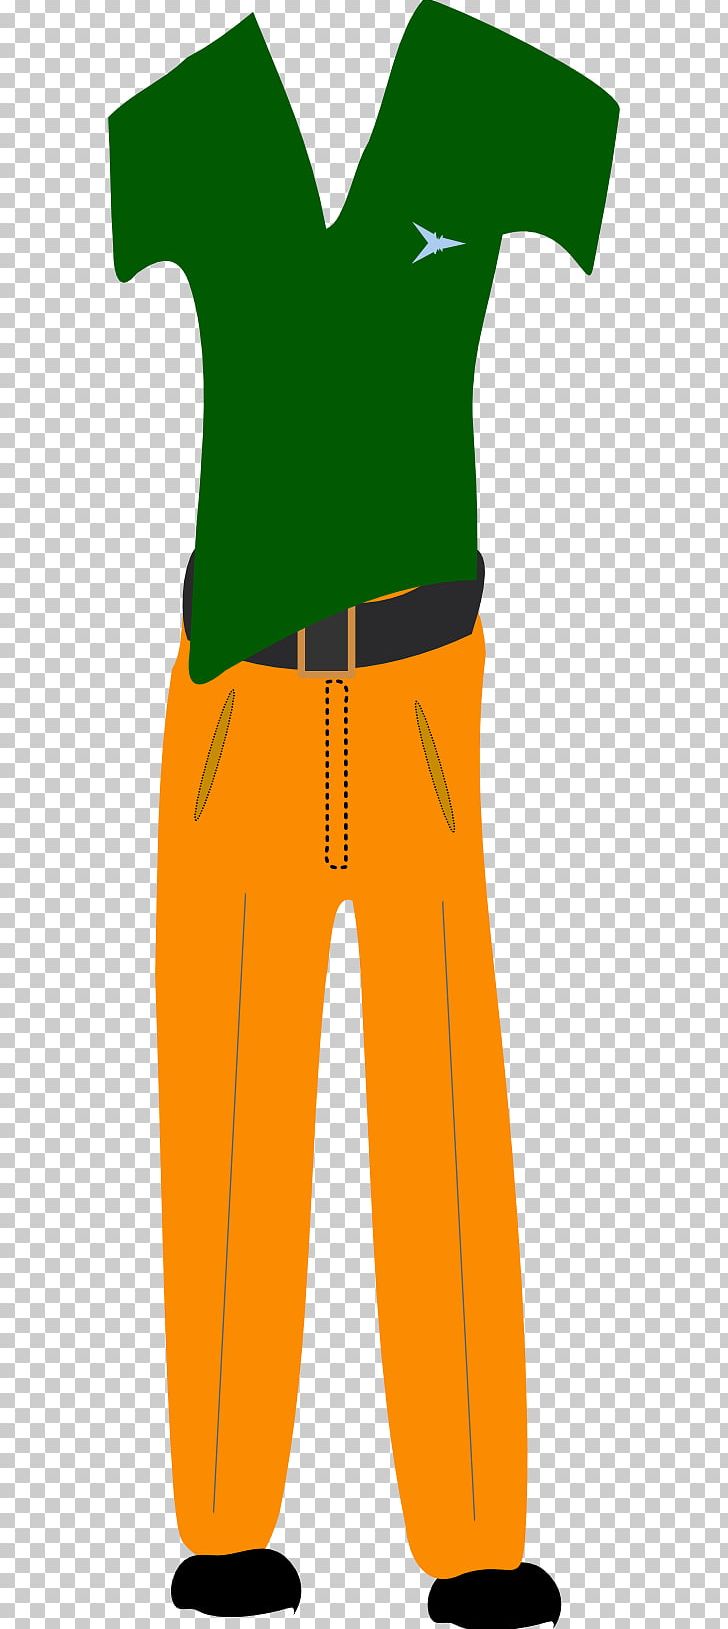 Clothing Free Content Trousers PNG, Clipart, Casual, Clothes Clip, Clothing, Fashion, Fashion Accessory Free PNG Download